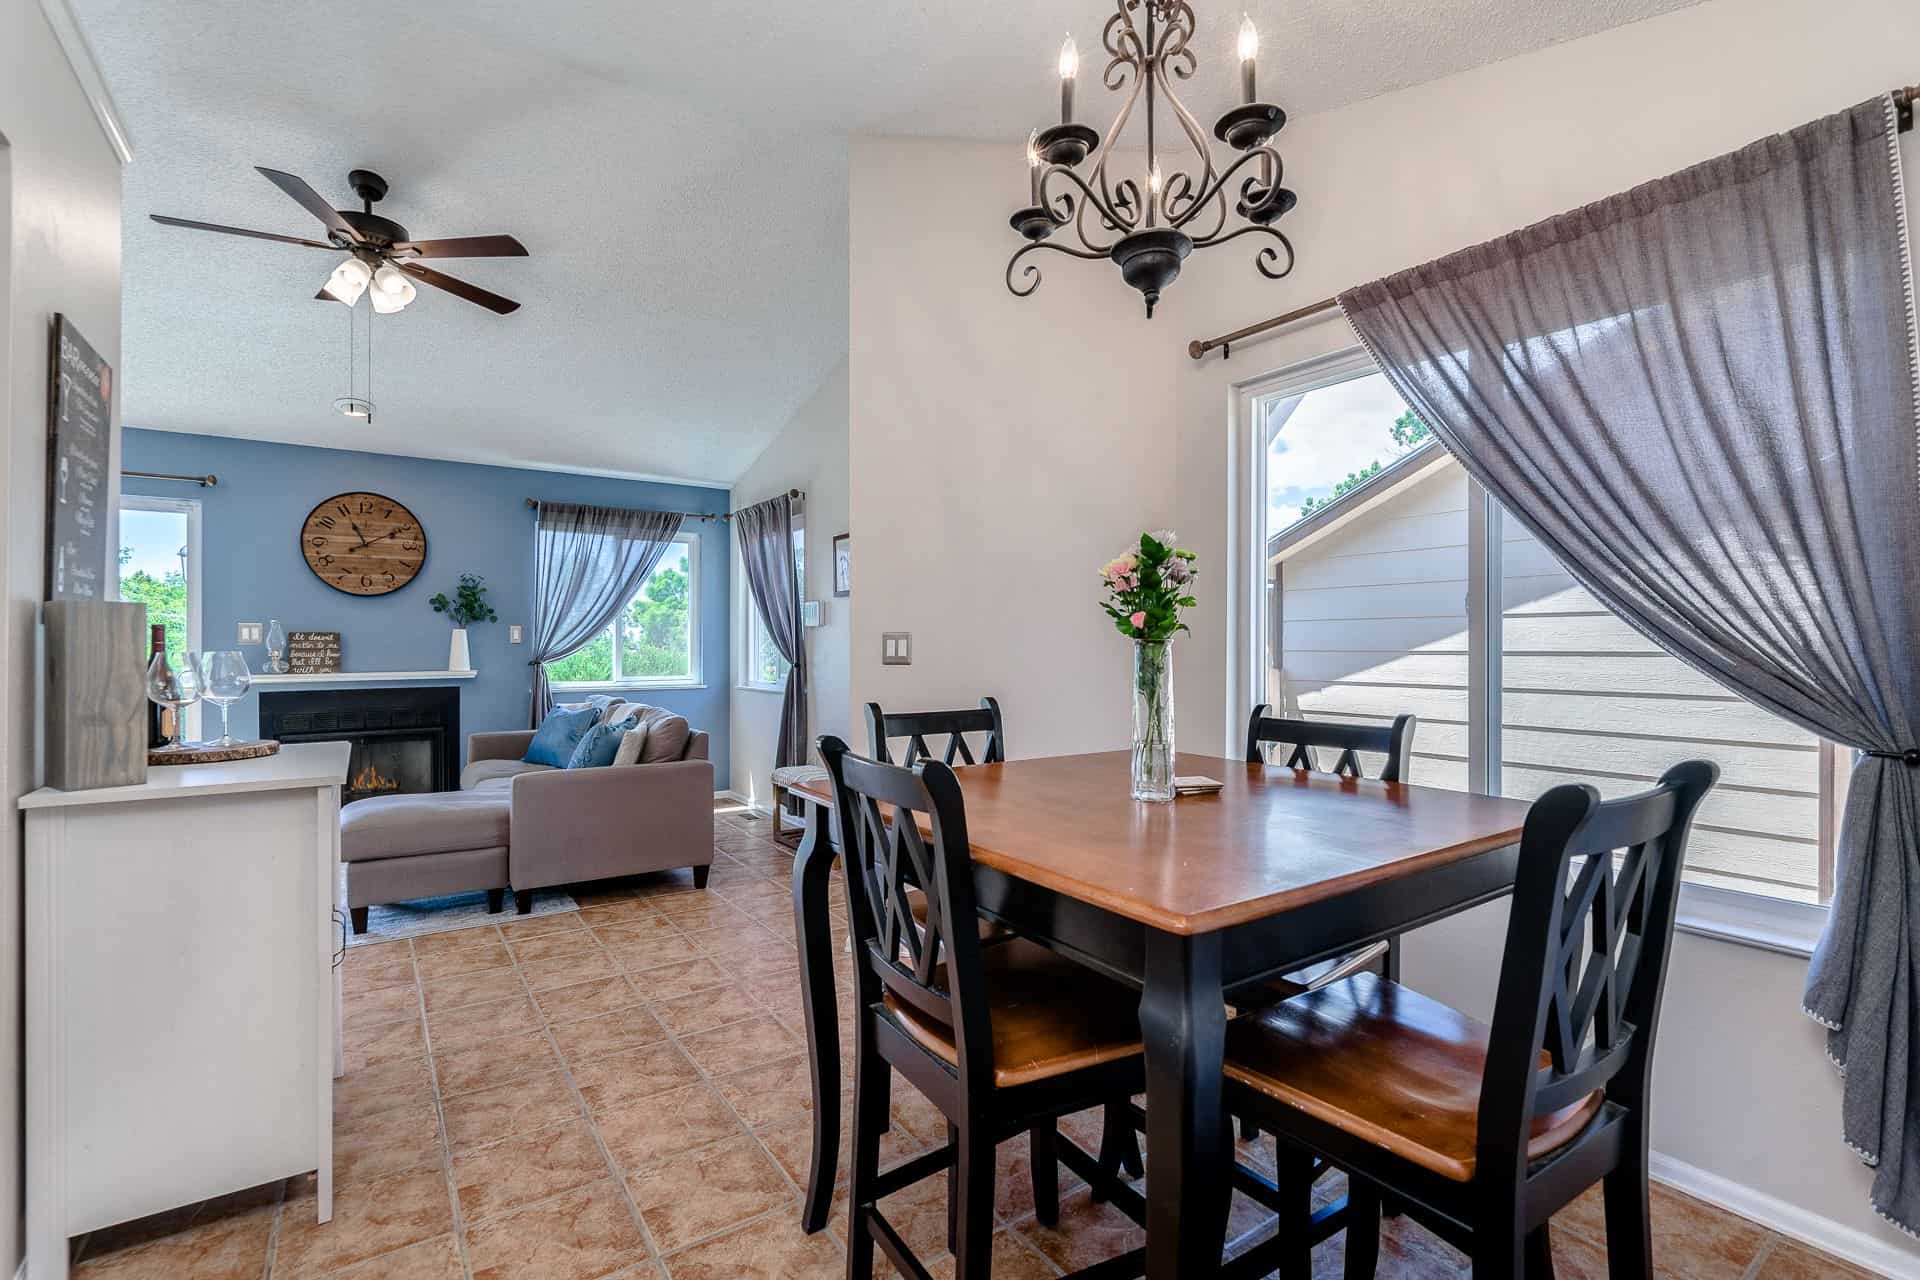 Dining Area located off the the Living Room and Kitchen and has an attractive light fixture and large window that brings in lots of natural light